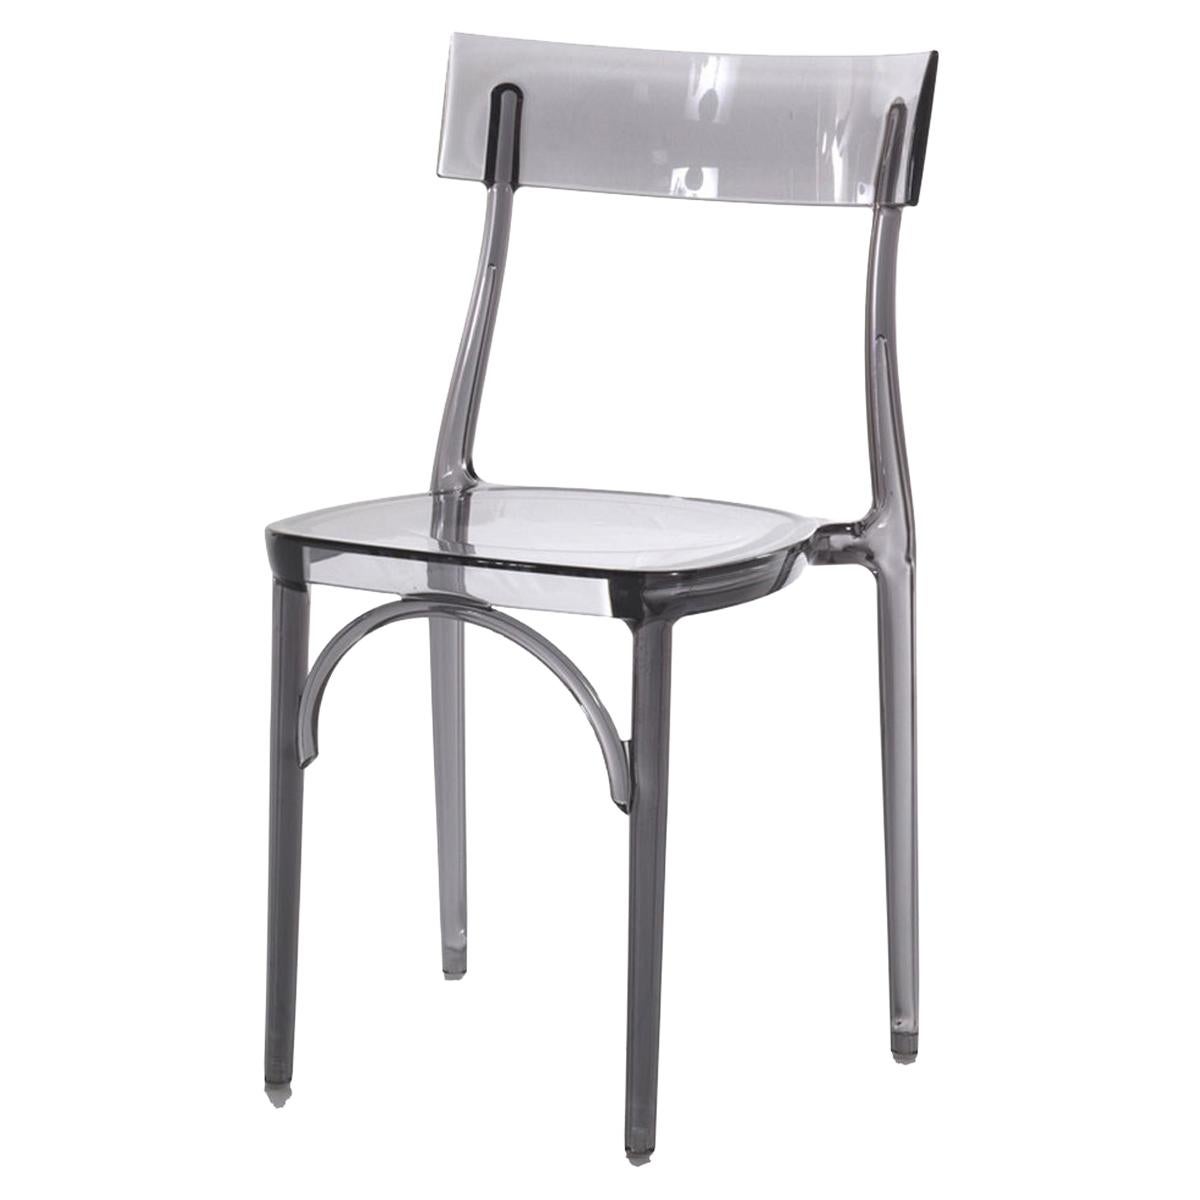 In Stock in Los Angeles, Milani, Transparent Grey Polycarbonate Dining Chair